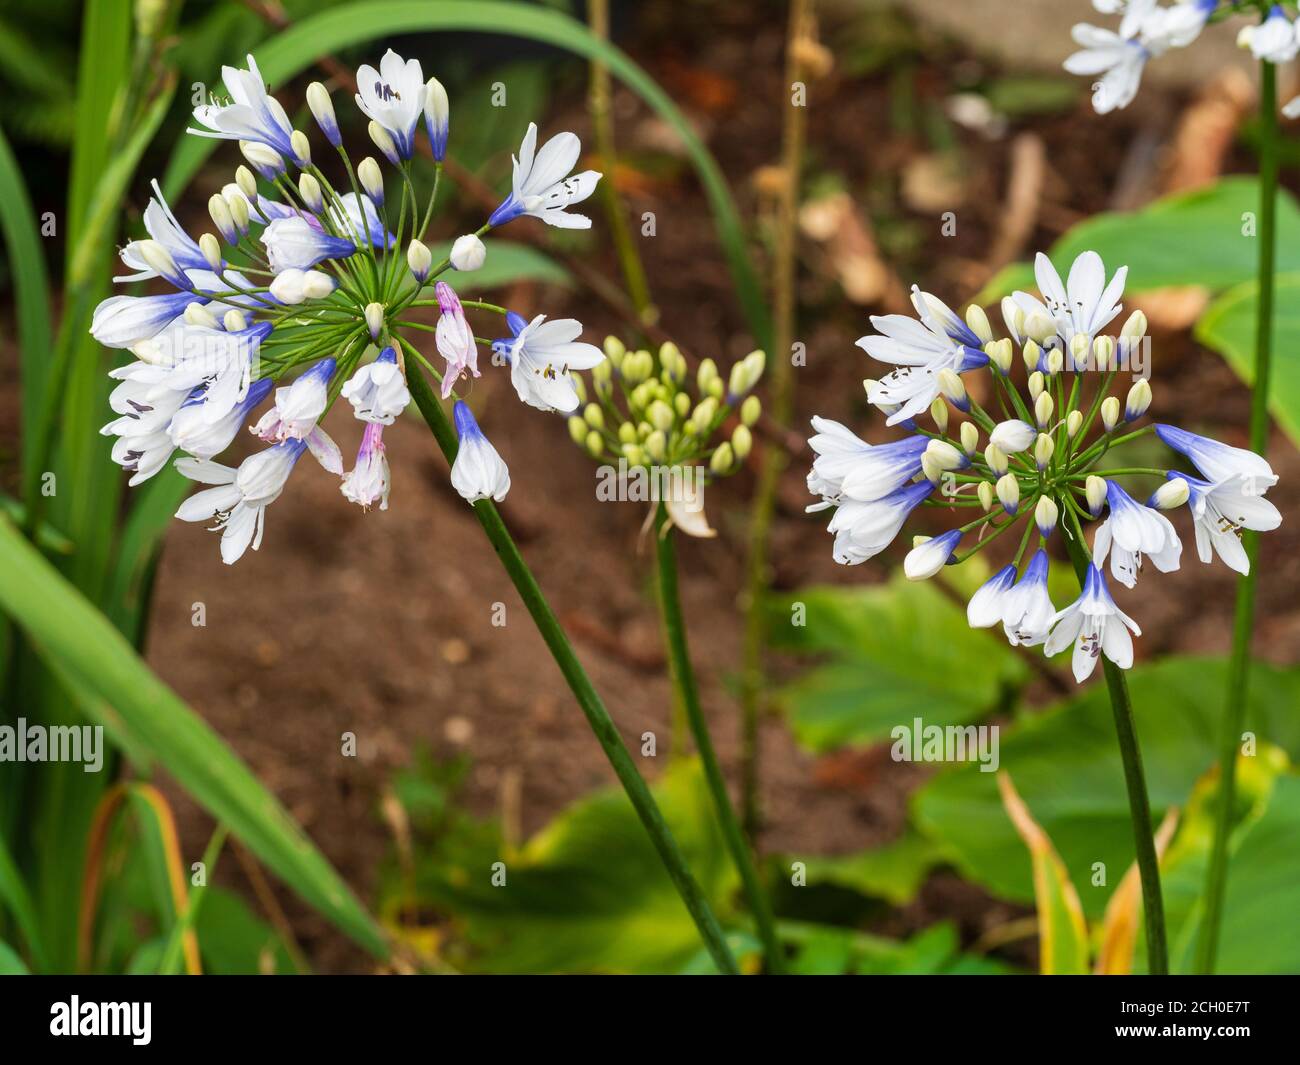 Blue and white tubular blooms in the flower heads of the hardy perennial Agapanthus 'Twister' Stock Photo